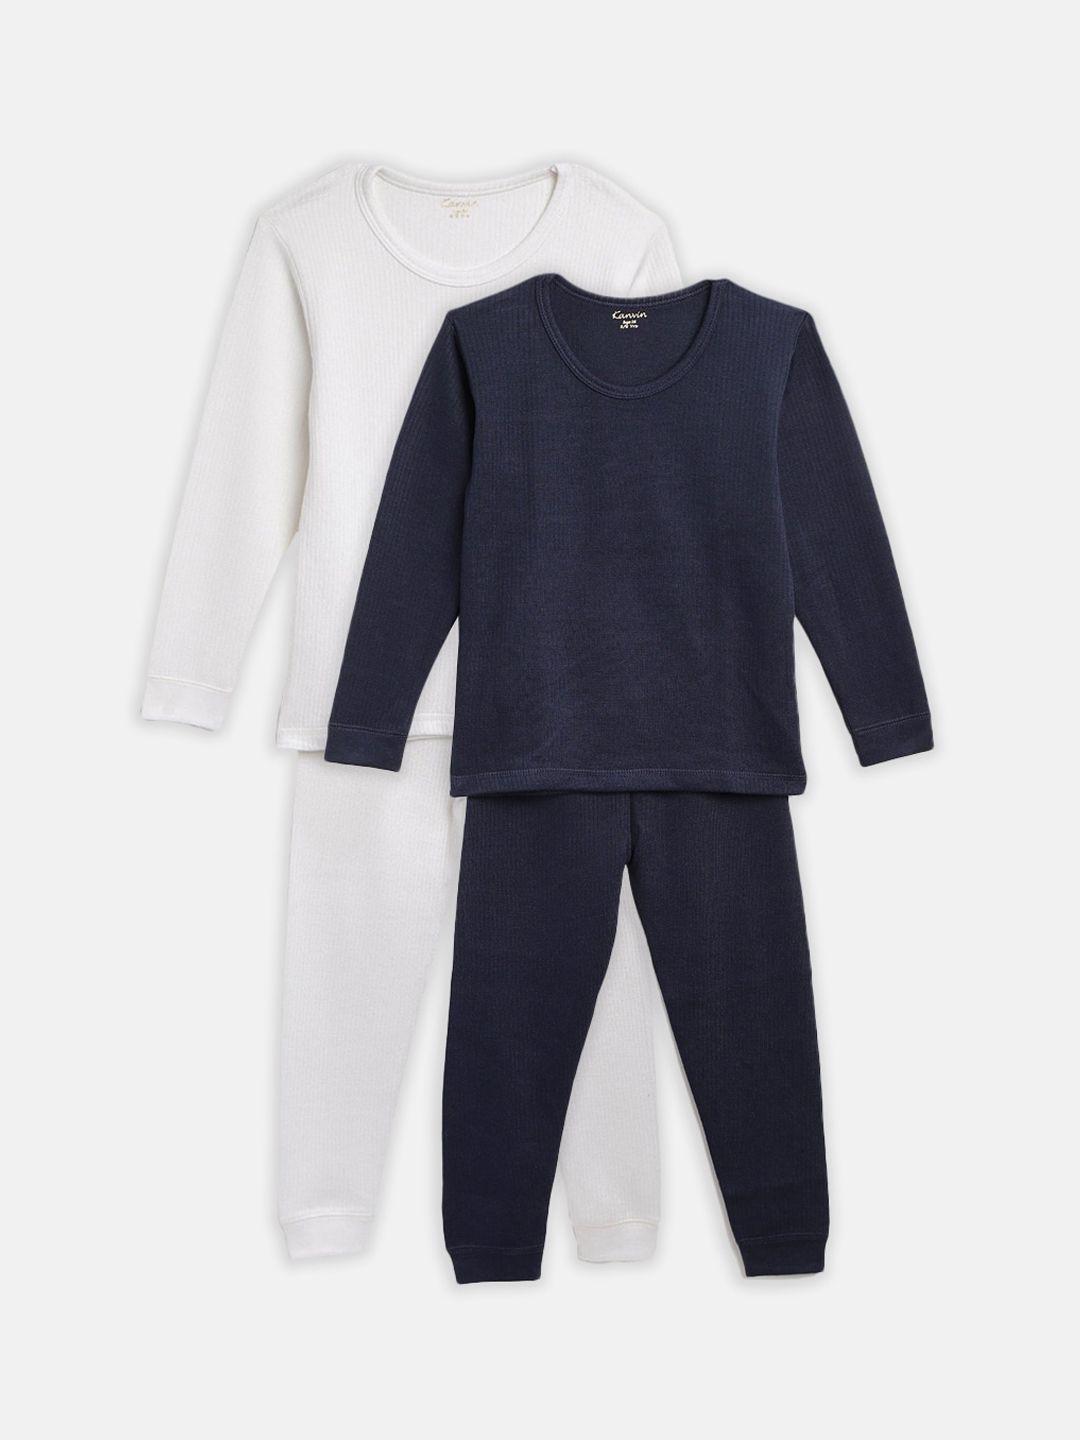 kanvin-boys-pack-of-2-white-&-navy-blue-solid-thermal-sets